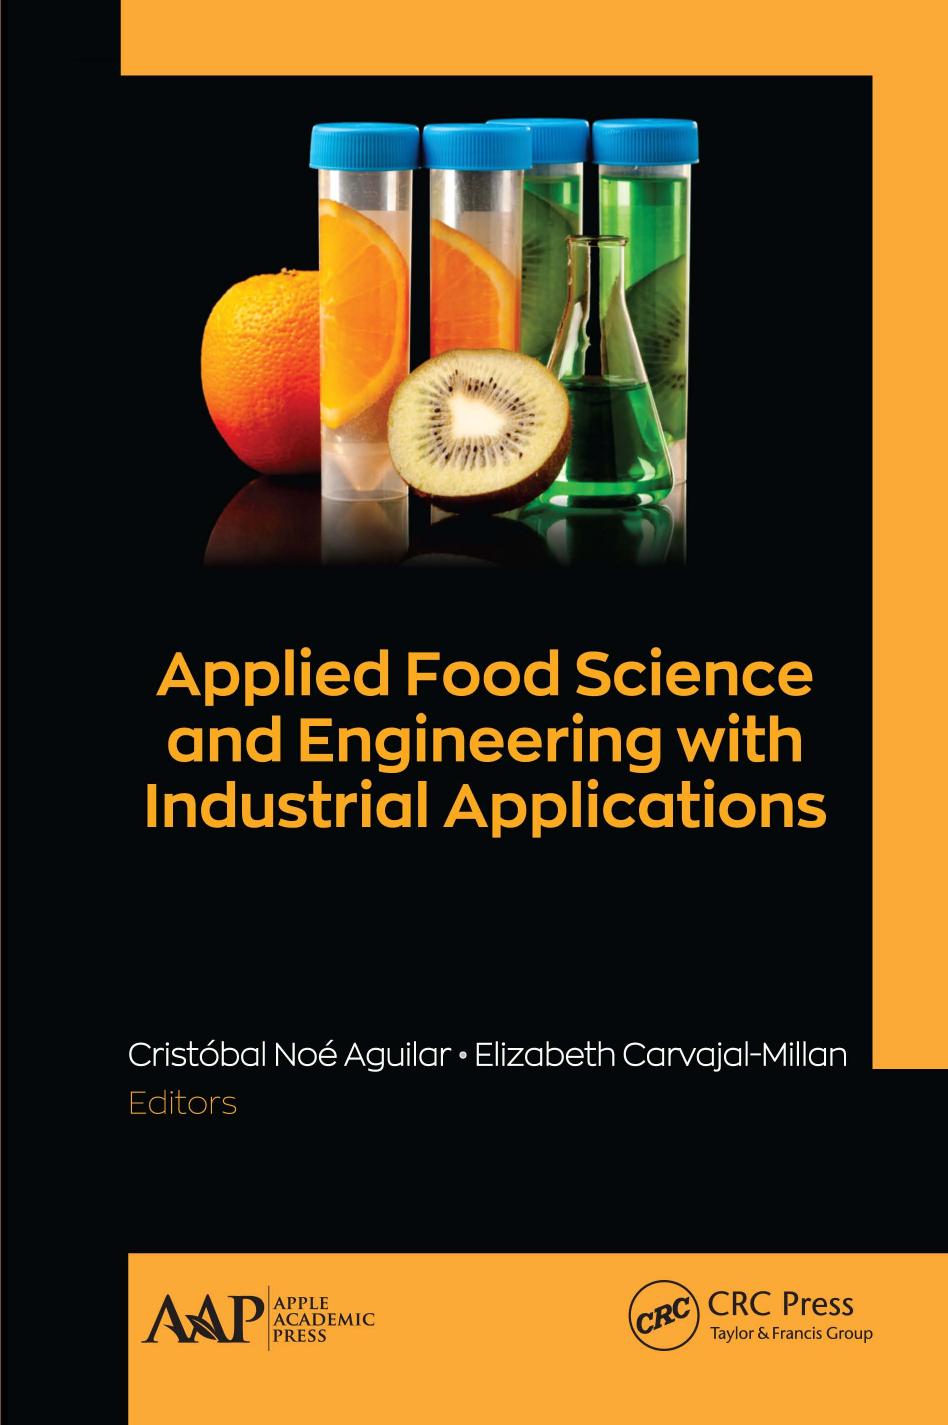 APPLIED FOOD SCIENCE AND ENGINEERING WITH INDUSTRIAL APPLICATIONS